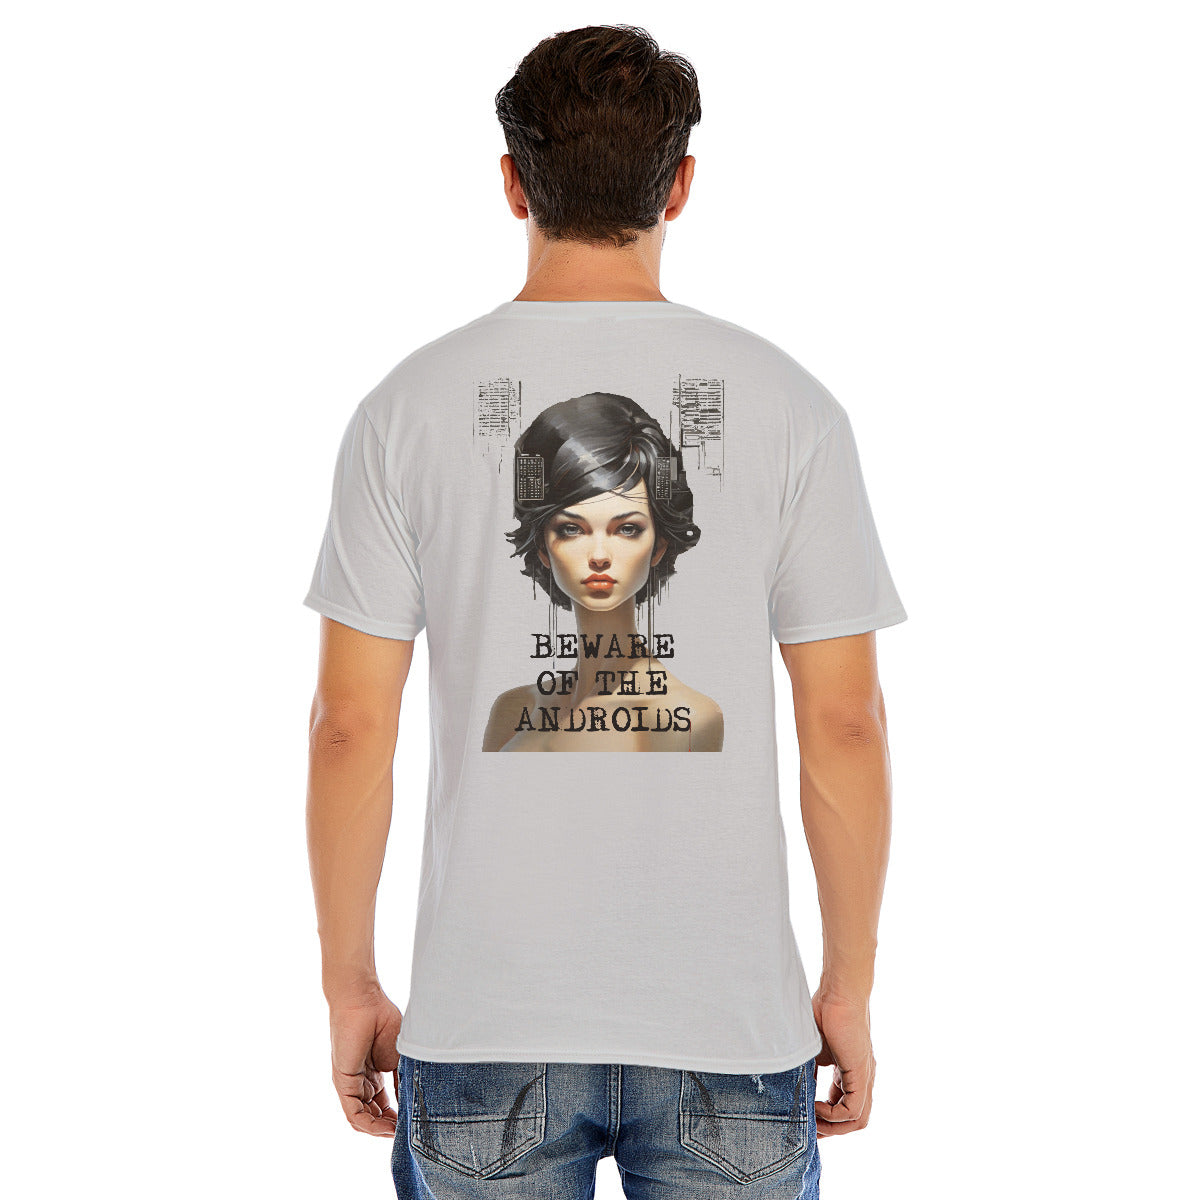 Beware of the Androids -- Unisex O-neck Short Sleeve T-shirt